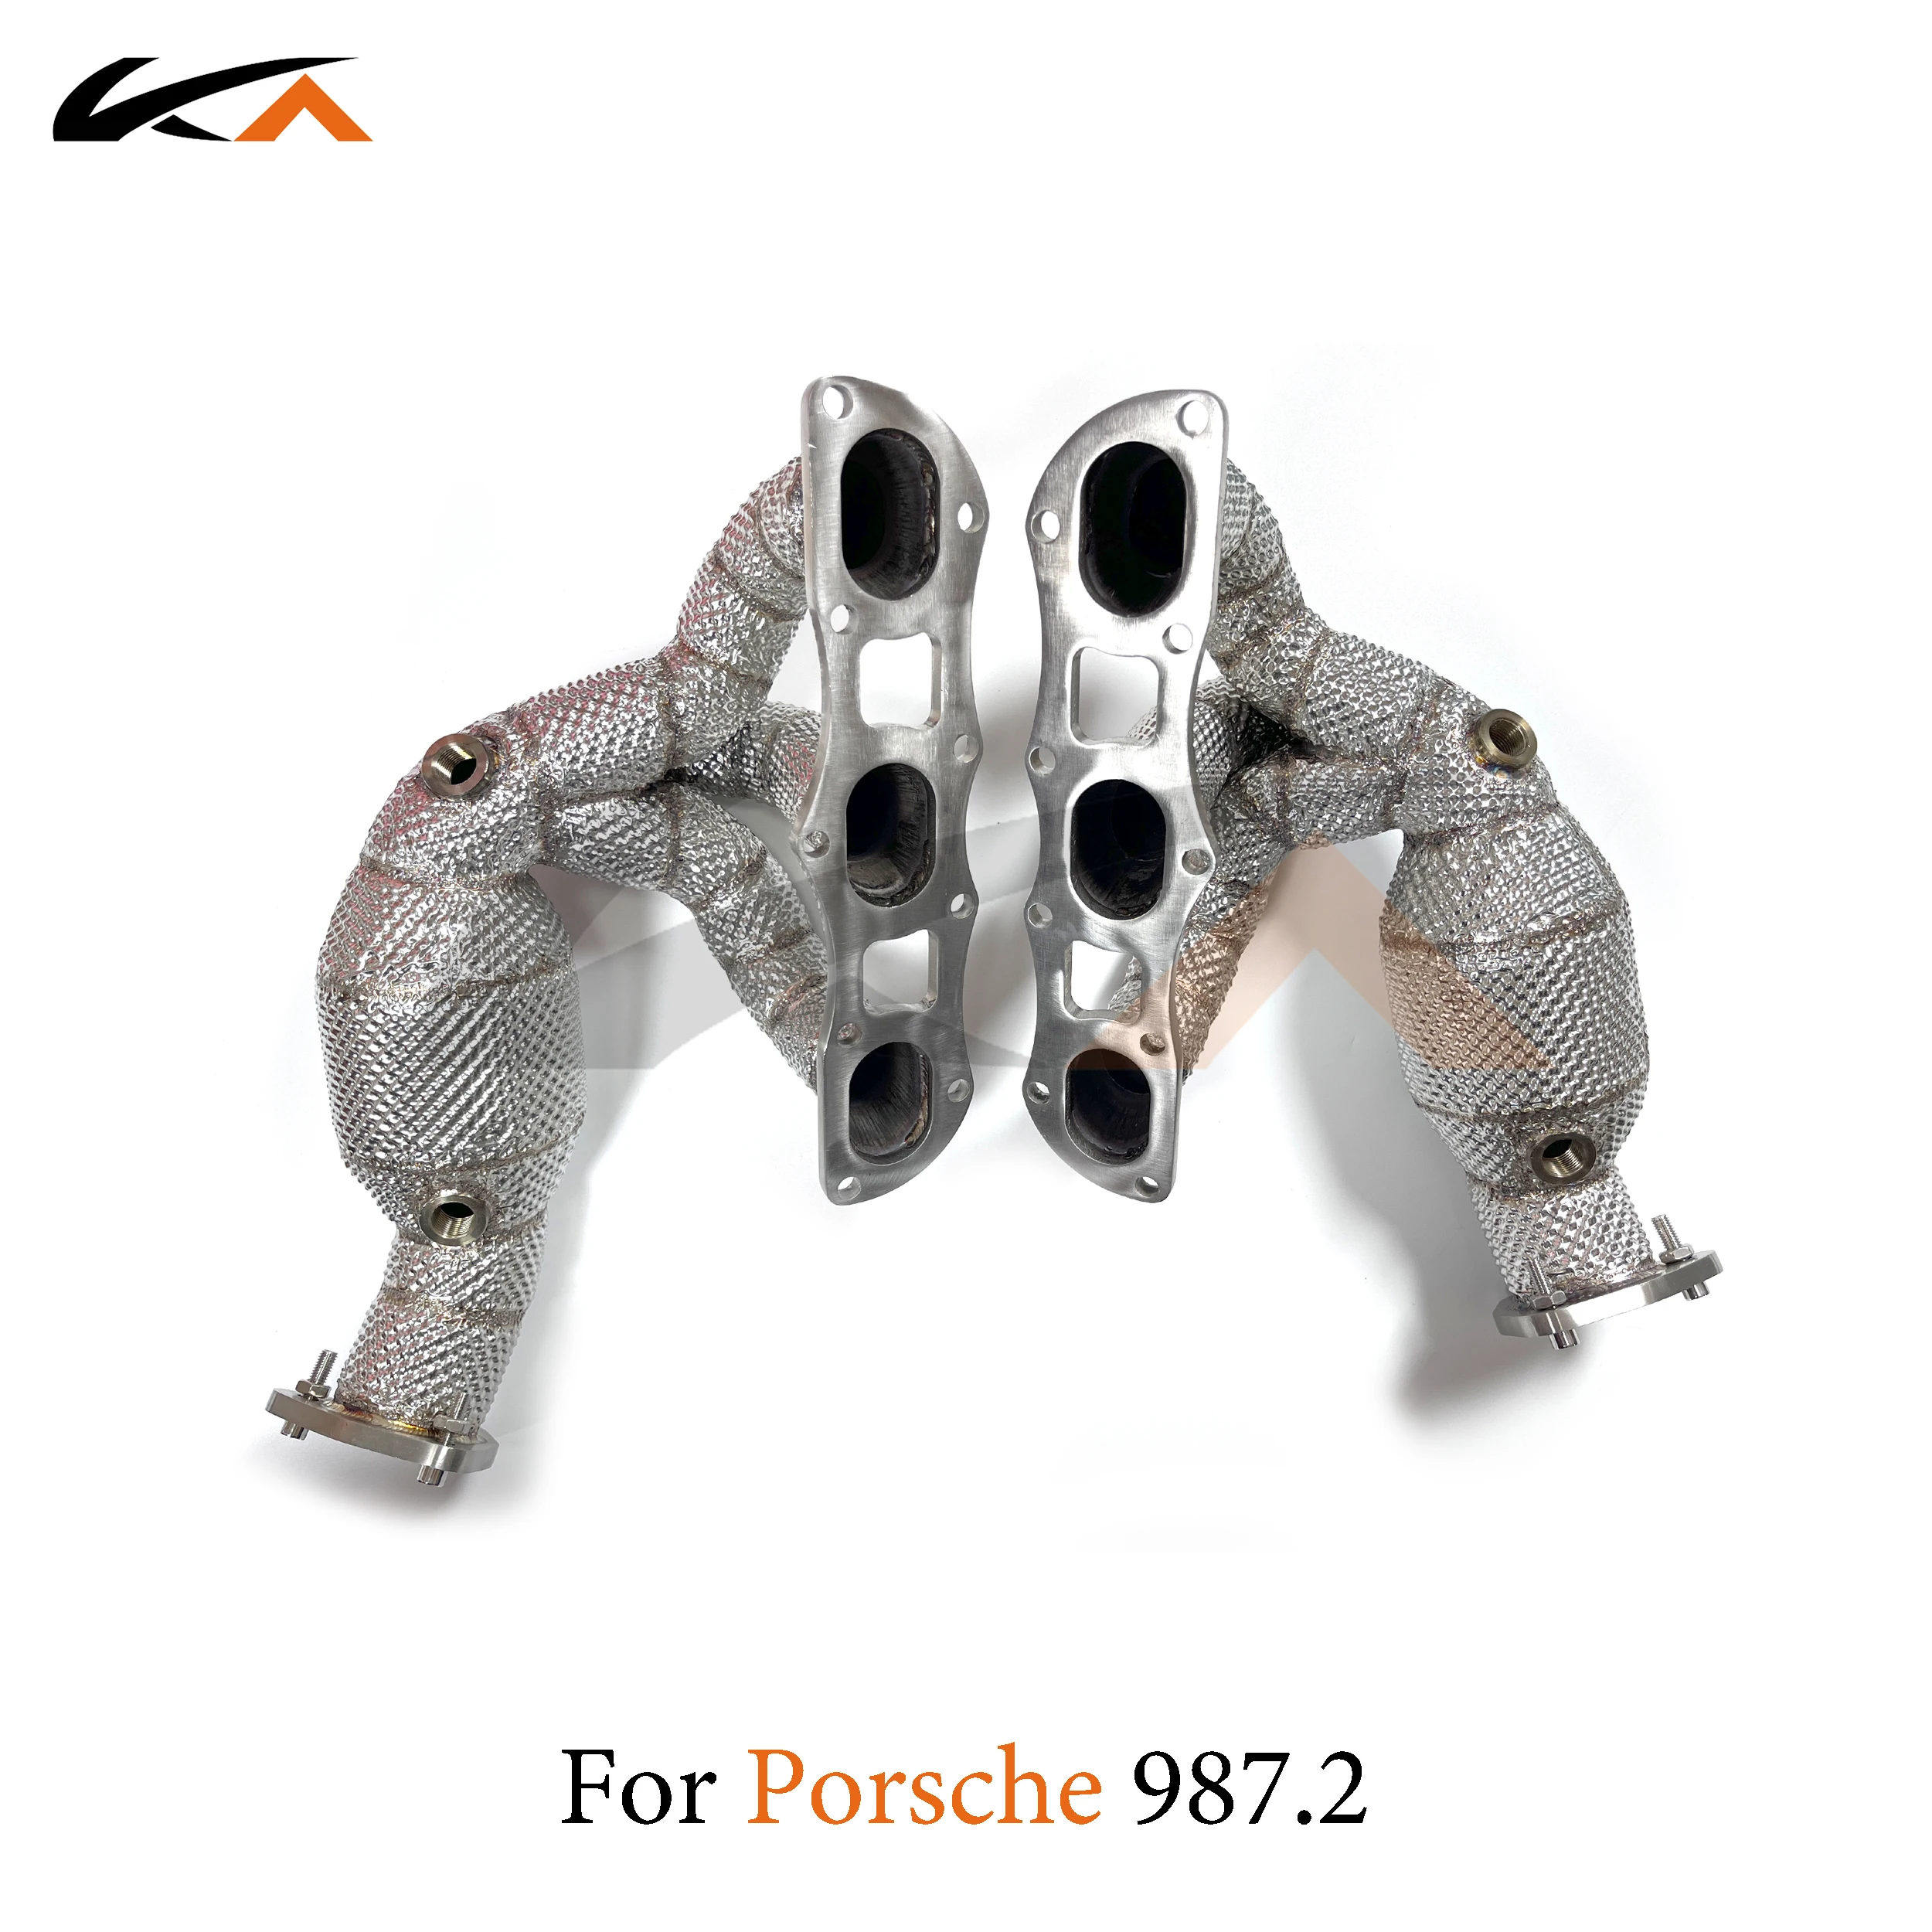 

KA Tuning manifold exhaust system stainless steel headers for Porsche Boxster Cayman 987 987.1 987.2 performance parts catalysis